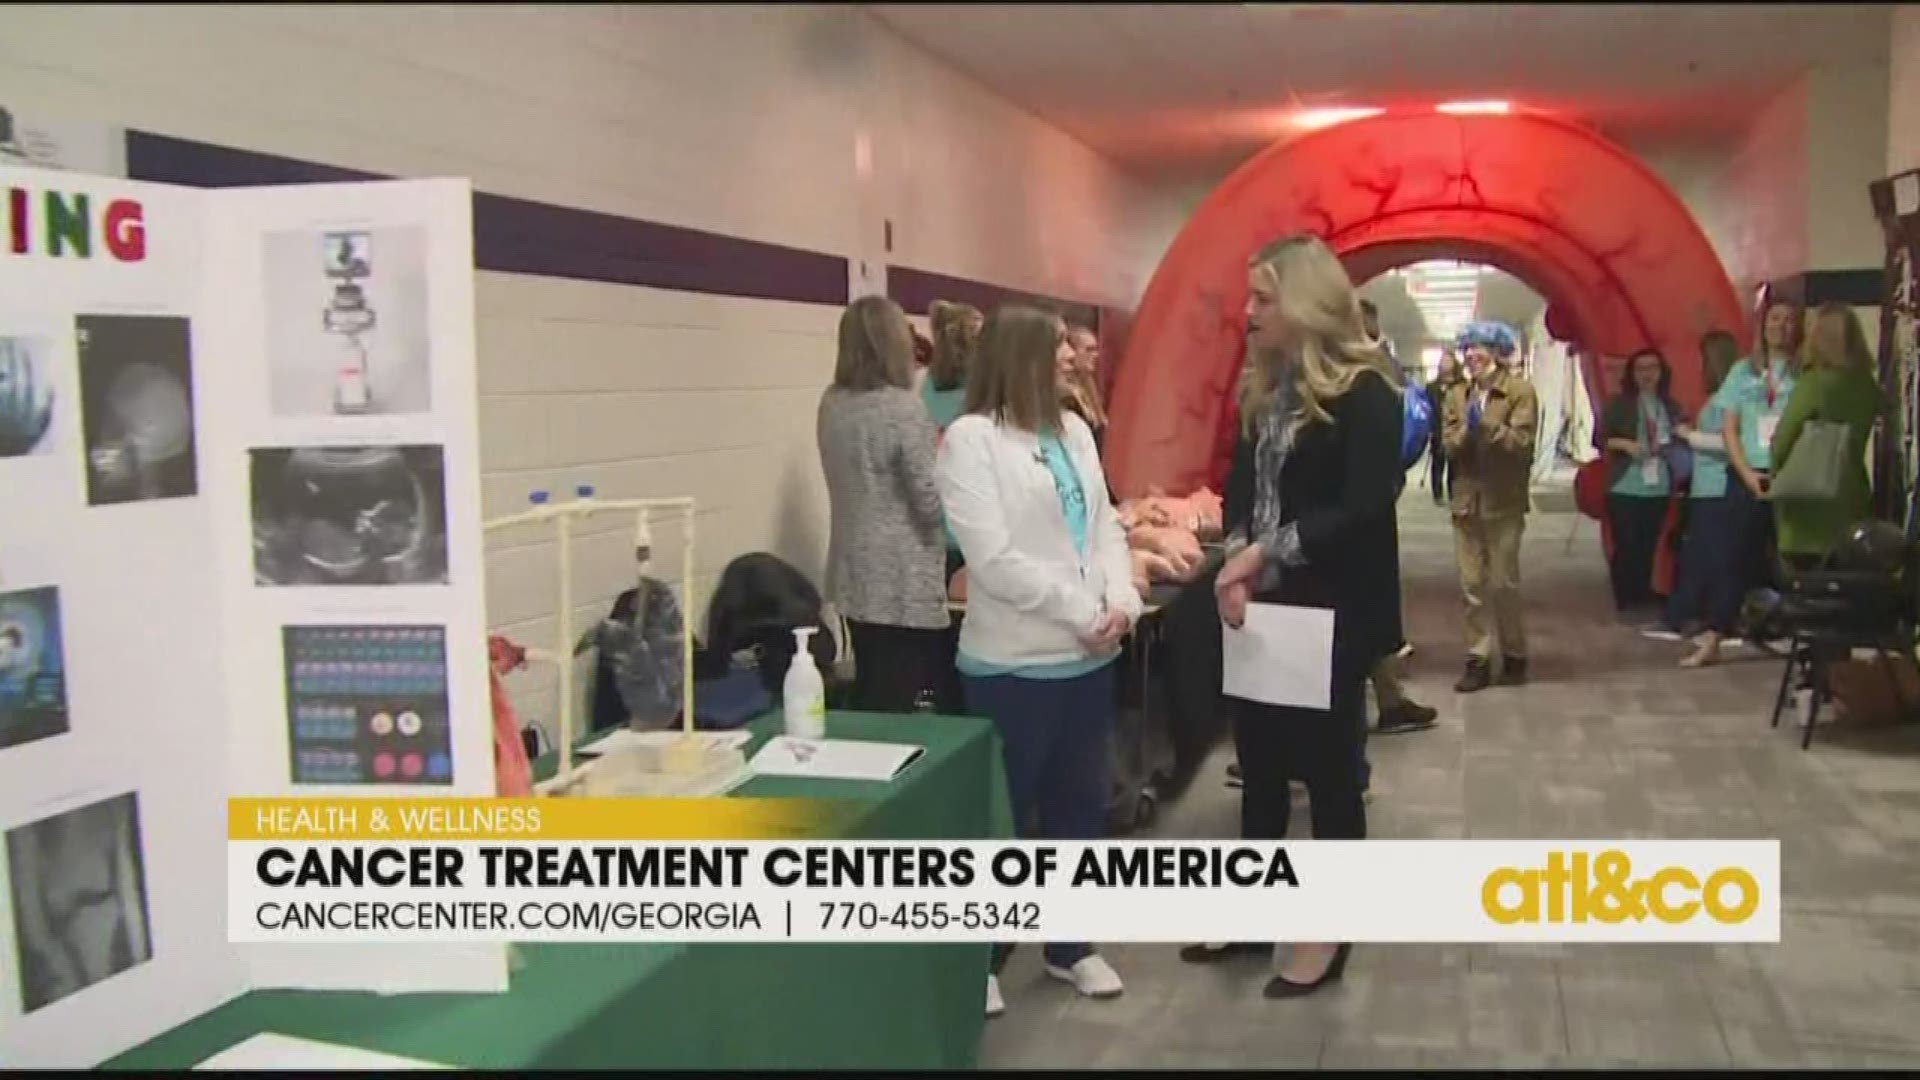 Cara Kneer checks out the Cancer Treatment Centers of America exhibit at Coweta Works.